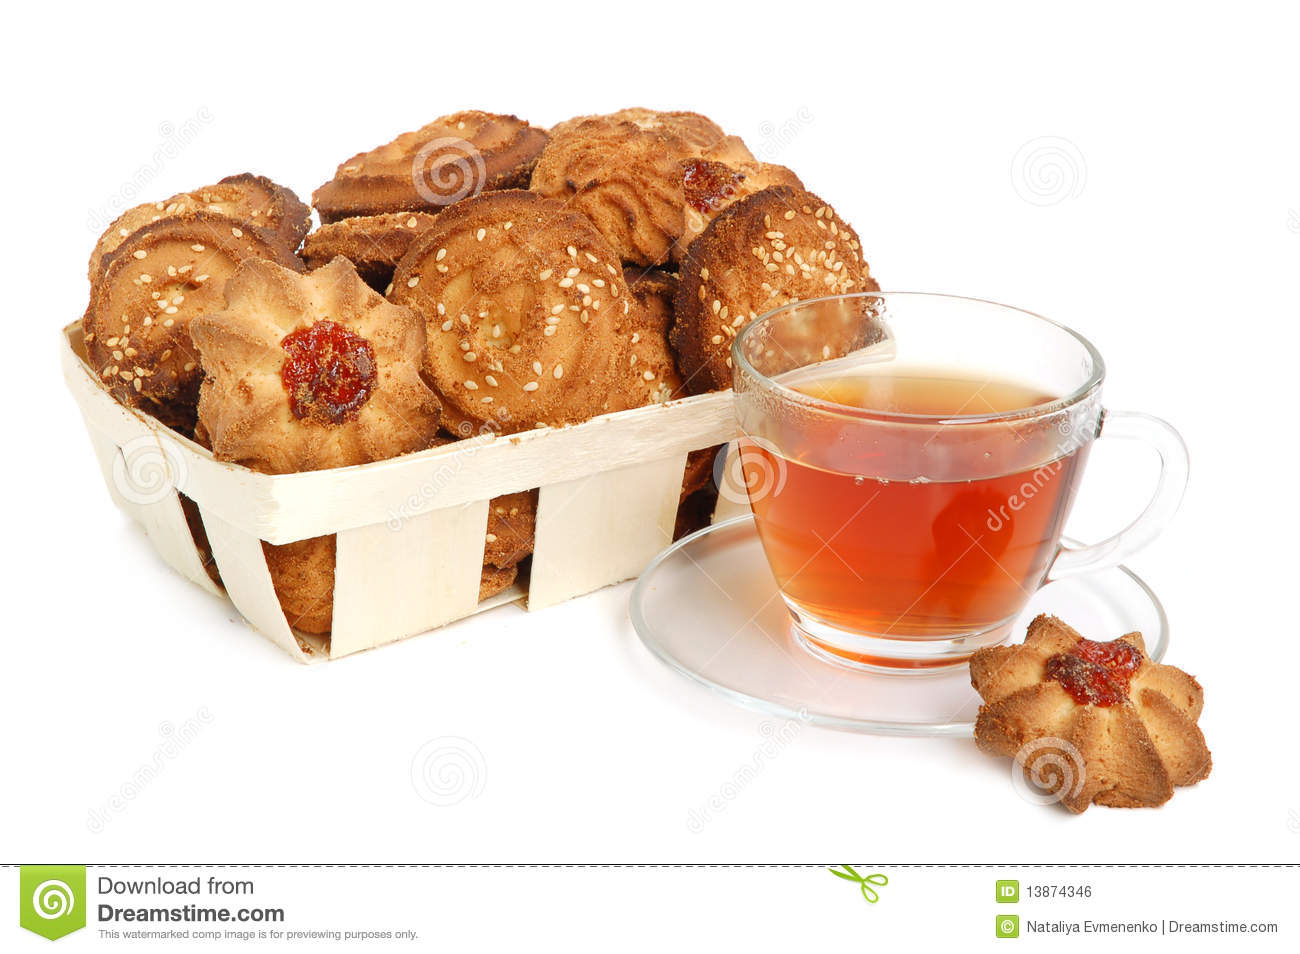 Tea And Cookies Royalty Free Stock Image   Image  13874346